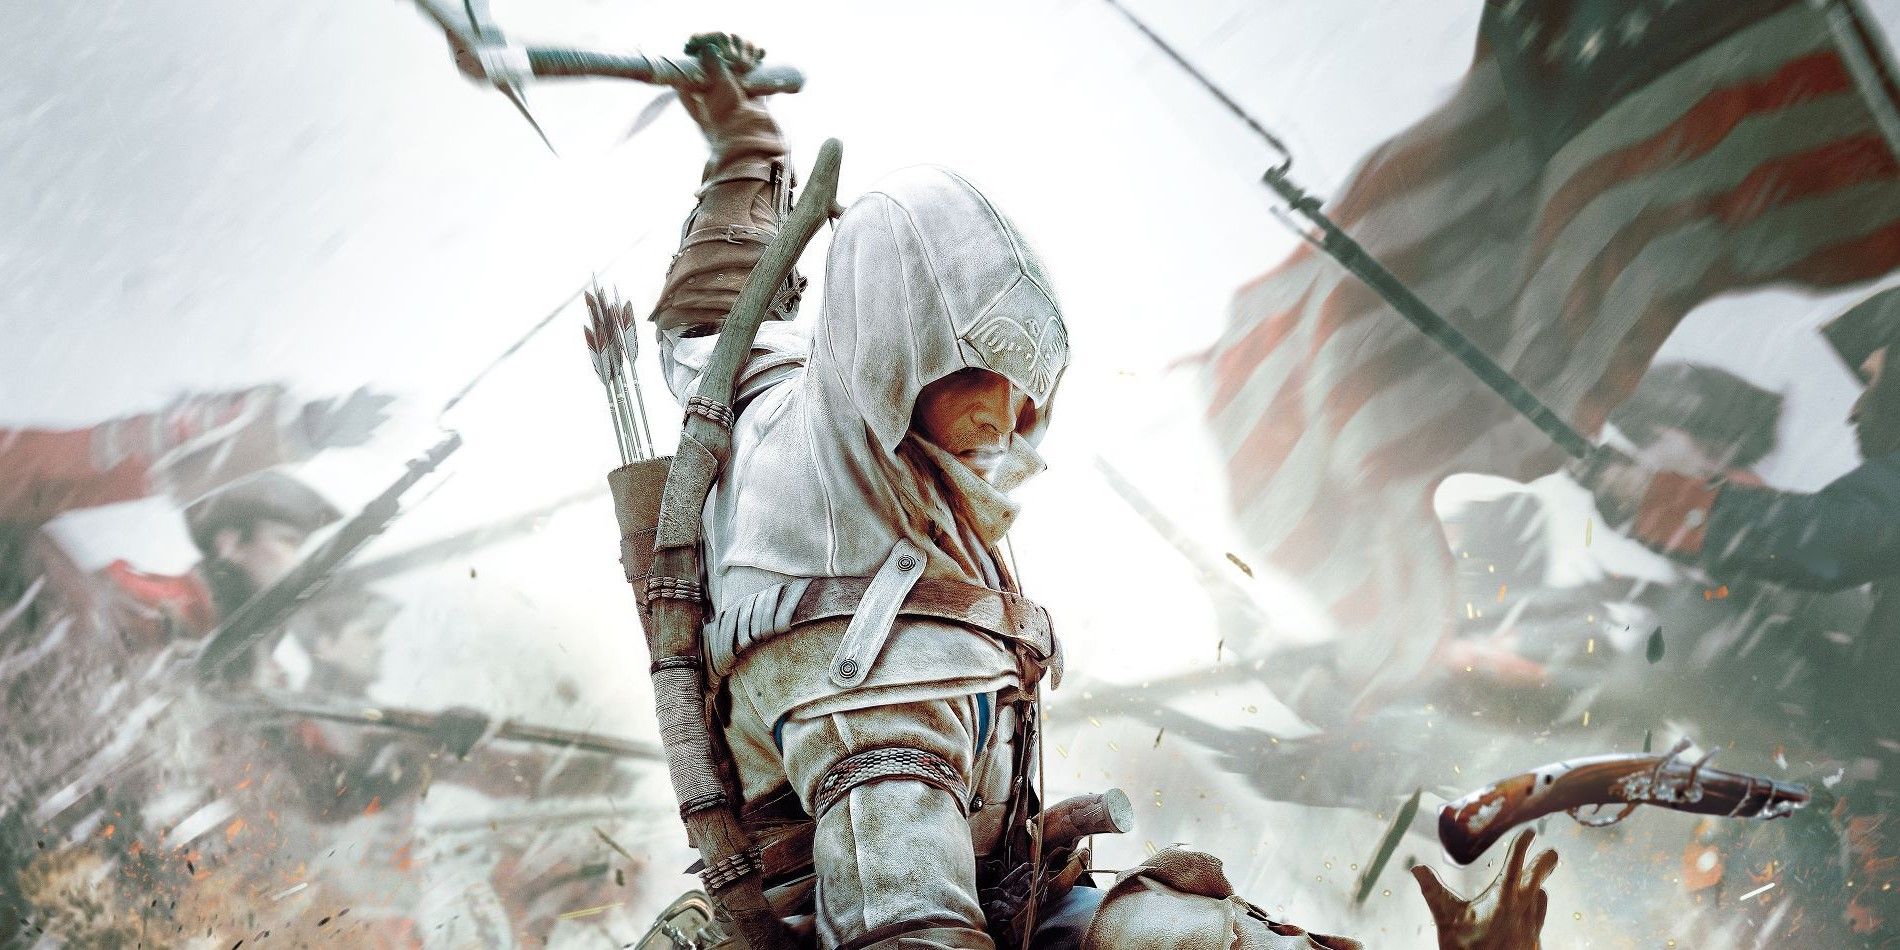 Ratonhnhaké:ton with a hatchet in Assassin's Creed III